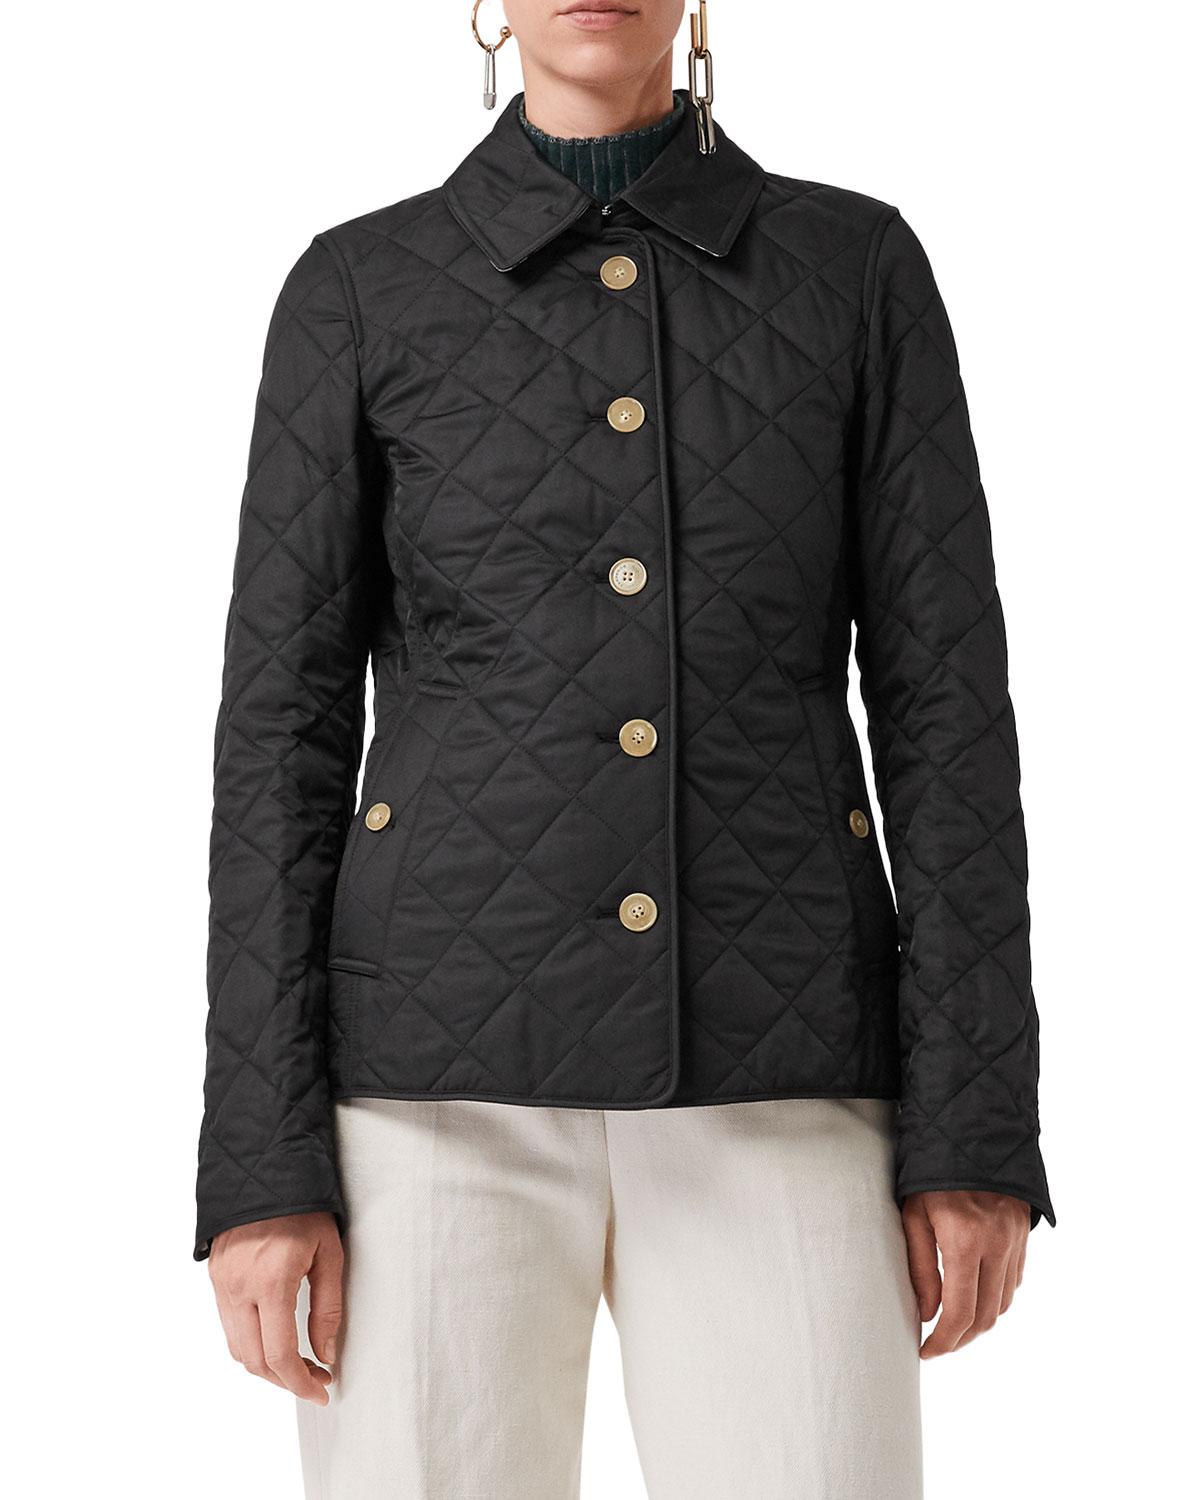 Lyst - Burberry Check-print Quilted Jacket in Black - Save 7. ...